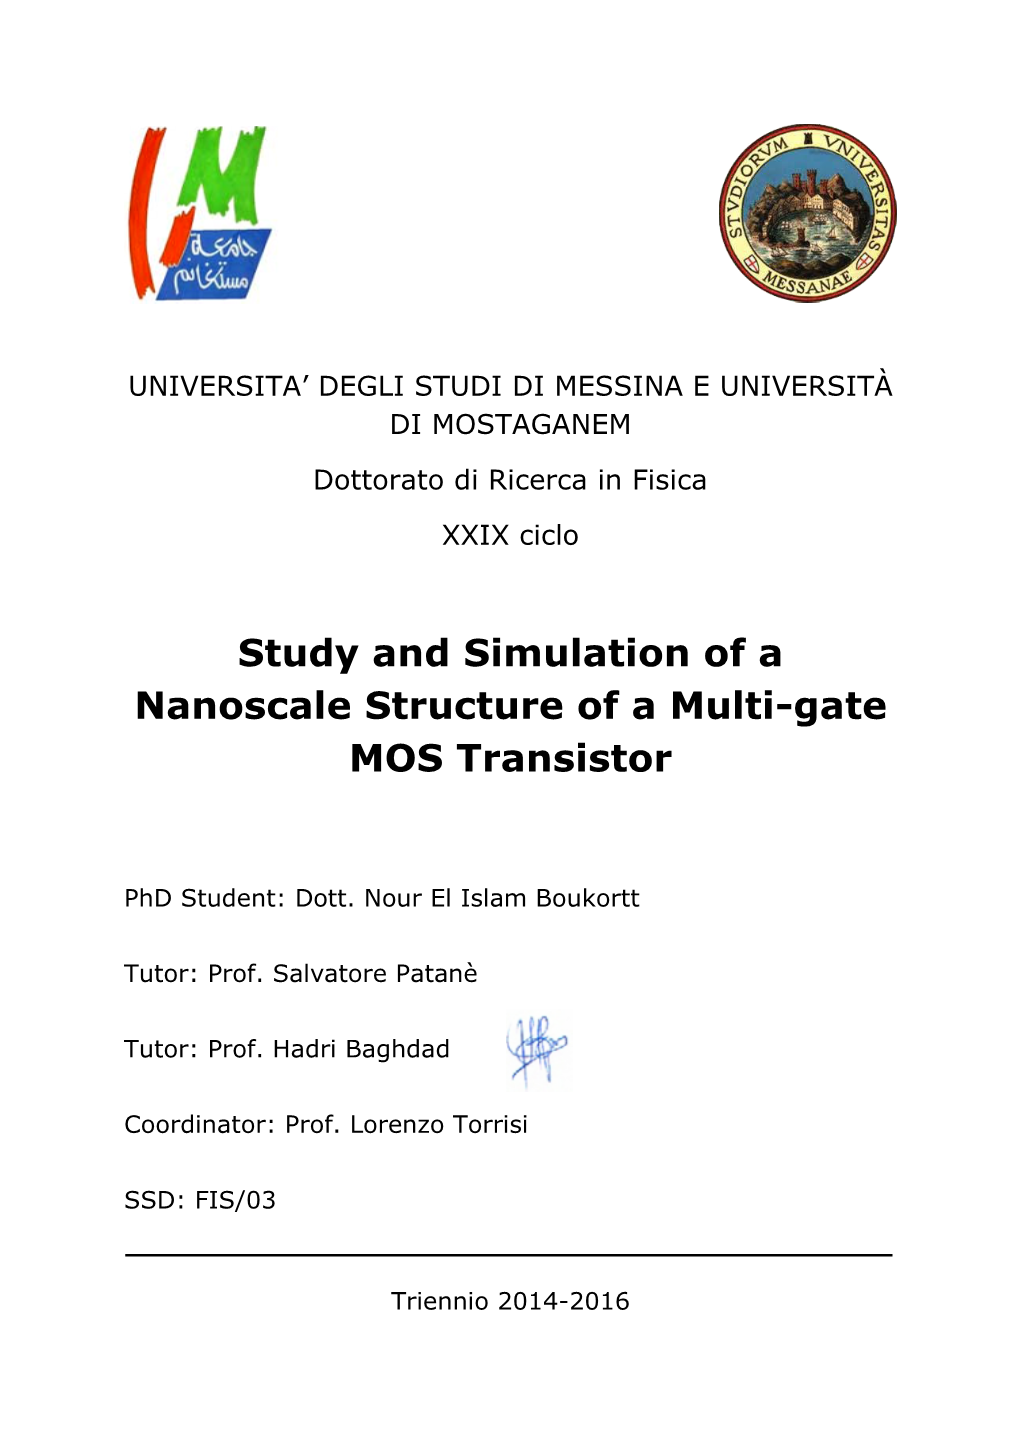 Study and Simulation of a Nanoscale Structure of a Multi-Gate MOS Transistor